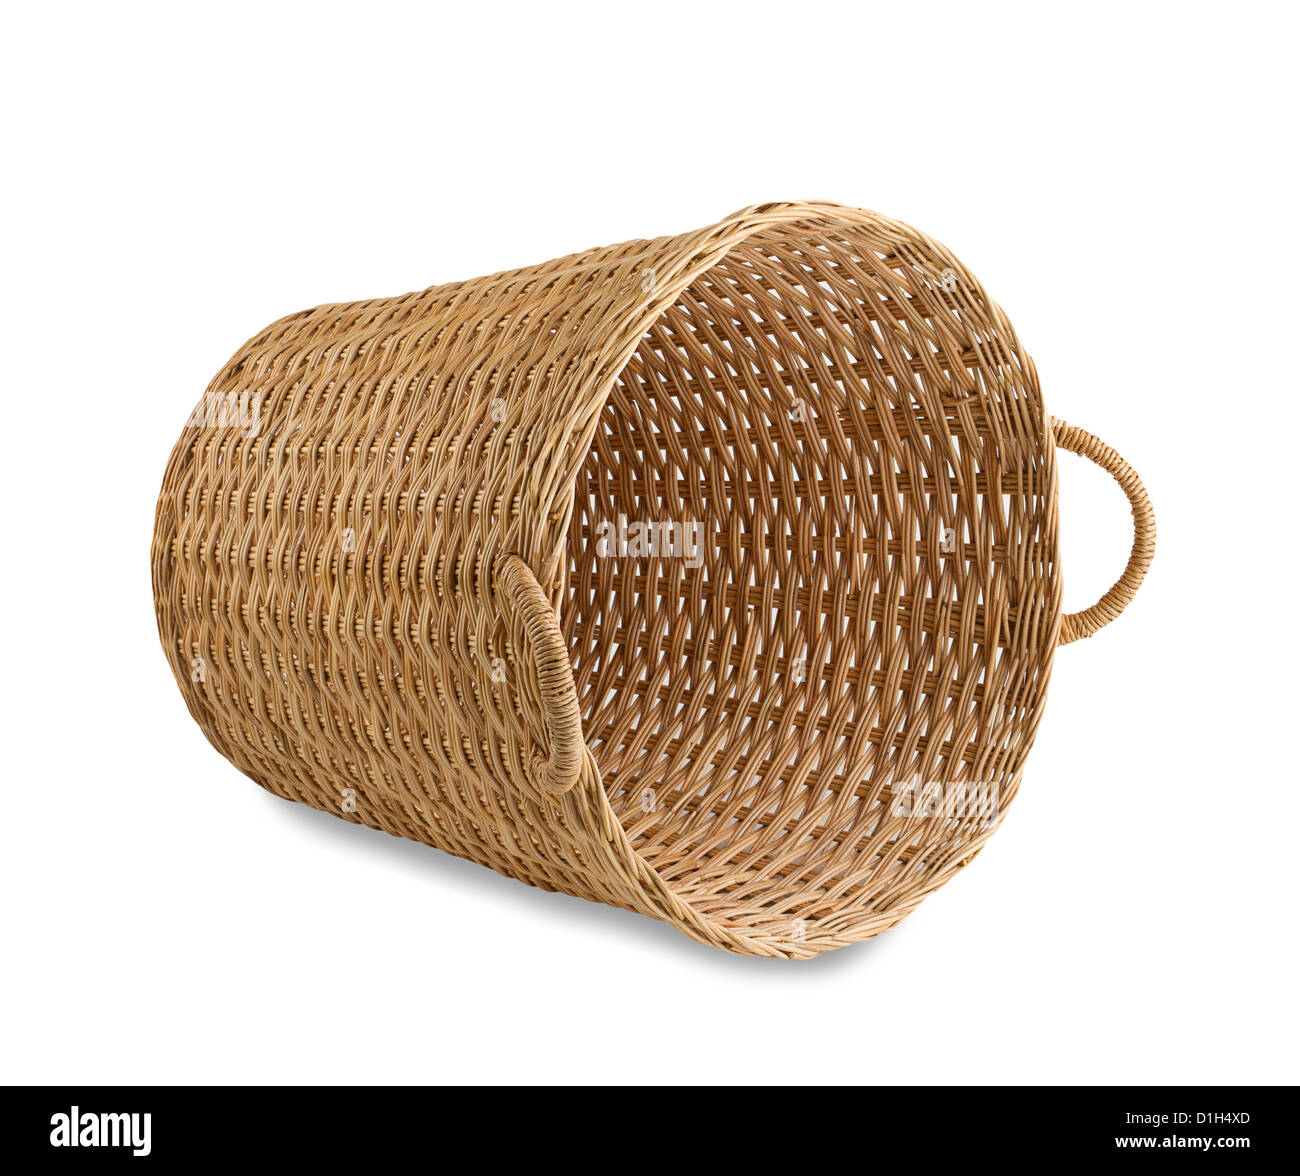 Handicraft rattan basket the old fashioned Thai style isolated Stock Photo